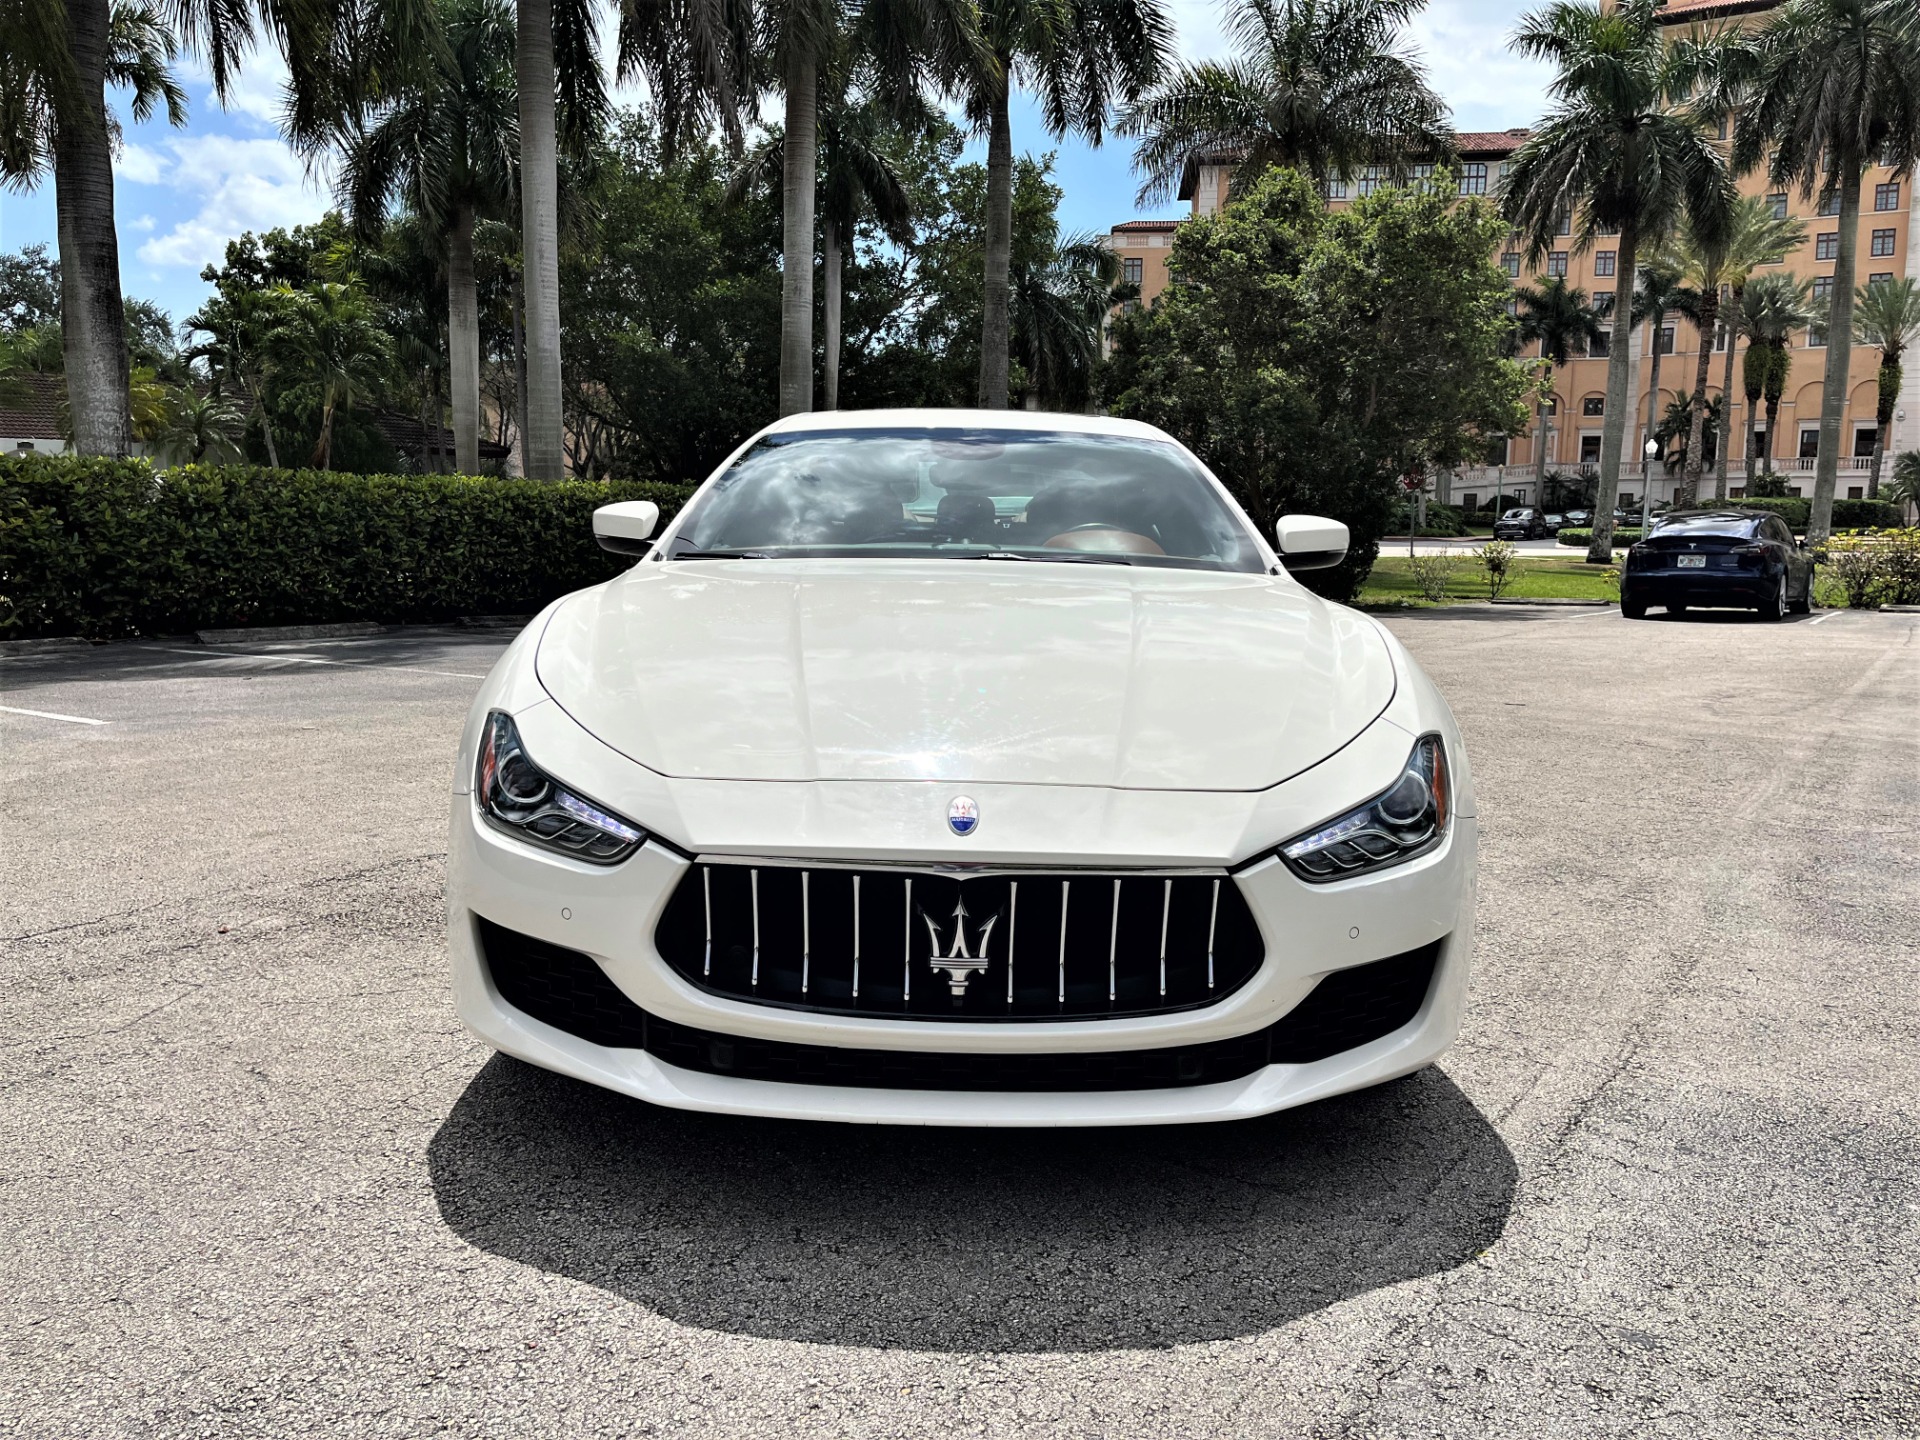 Used 2018 Maserati Ghibli SQ4 for sale Sold at The Gables Sports Cars in Miami FL 33146 2